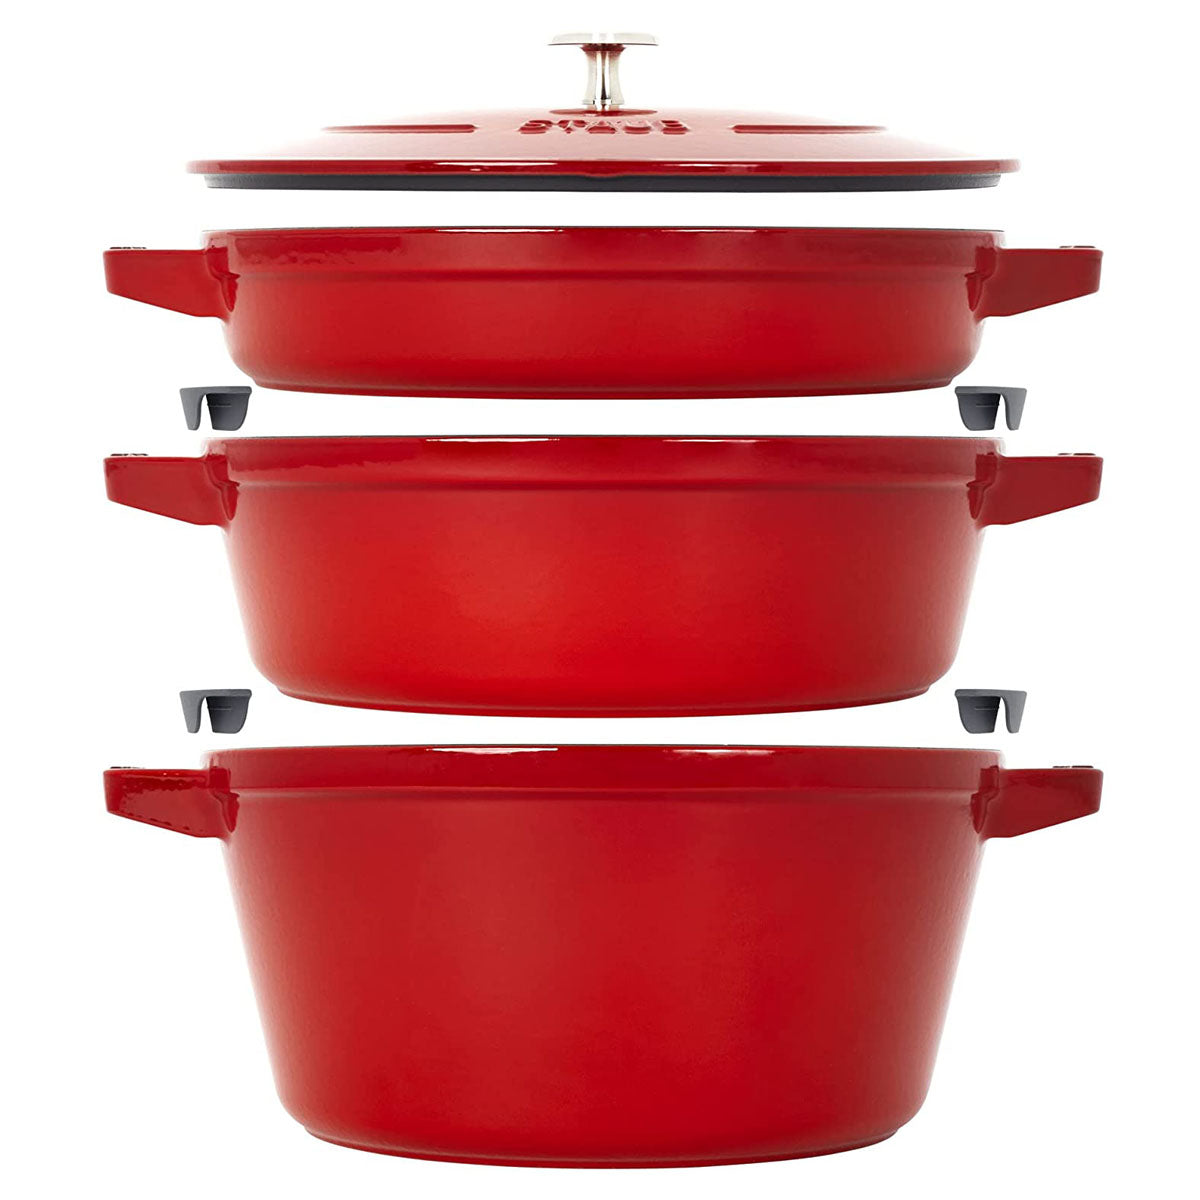 Staub's Cast Iron Dutch Ovens Are Up to 60% Off Right Now